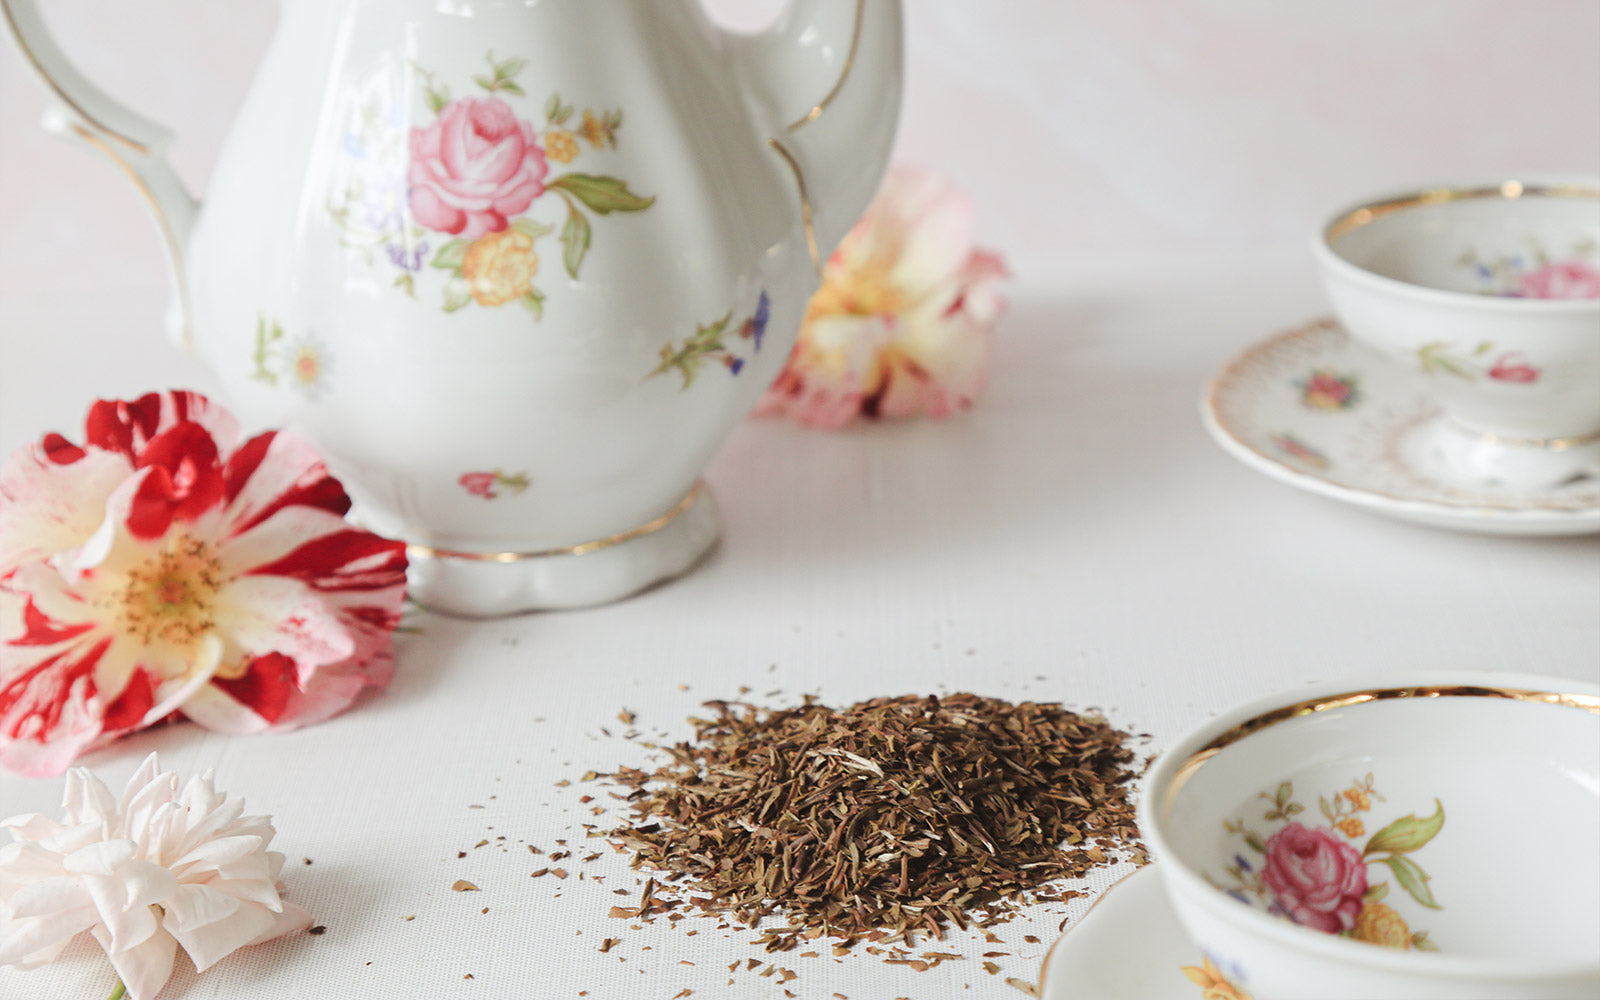 How to Experiment with Flavors and Blends Using Loose Leaf Tea